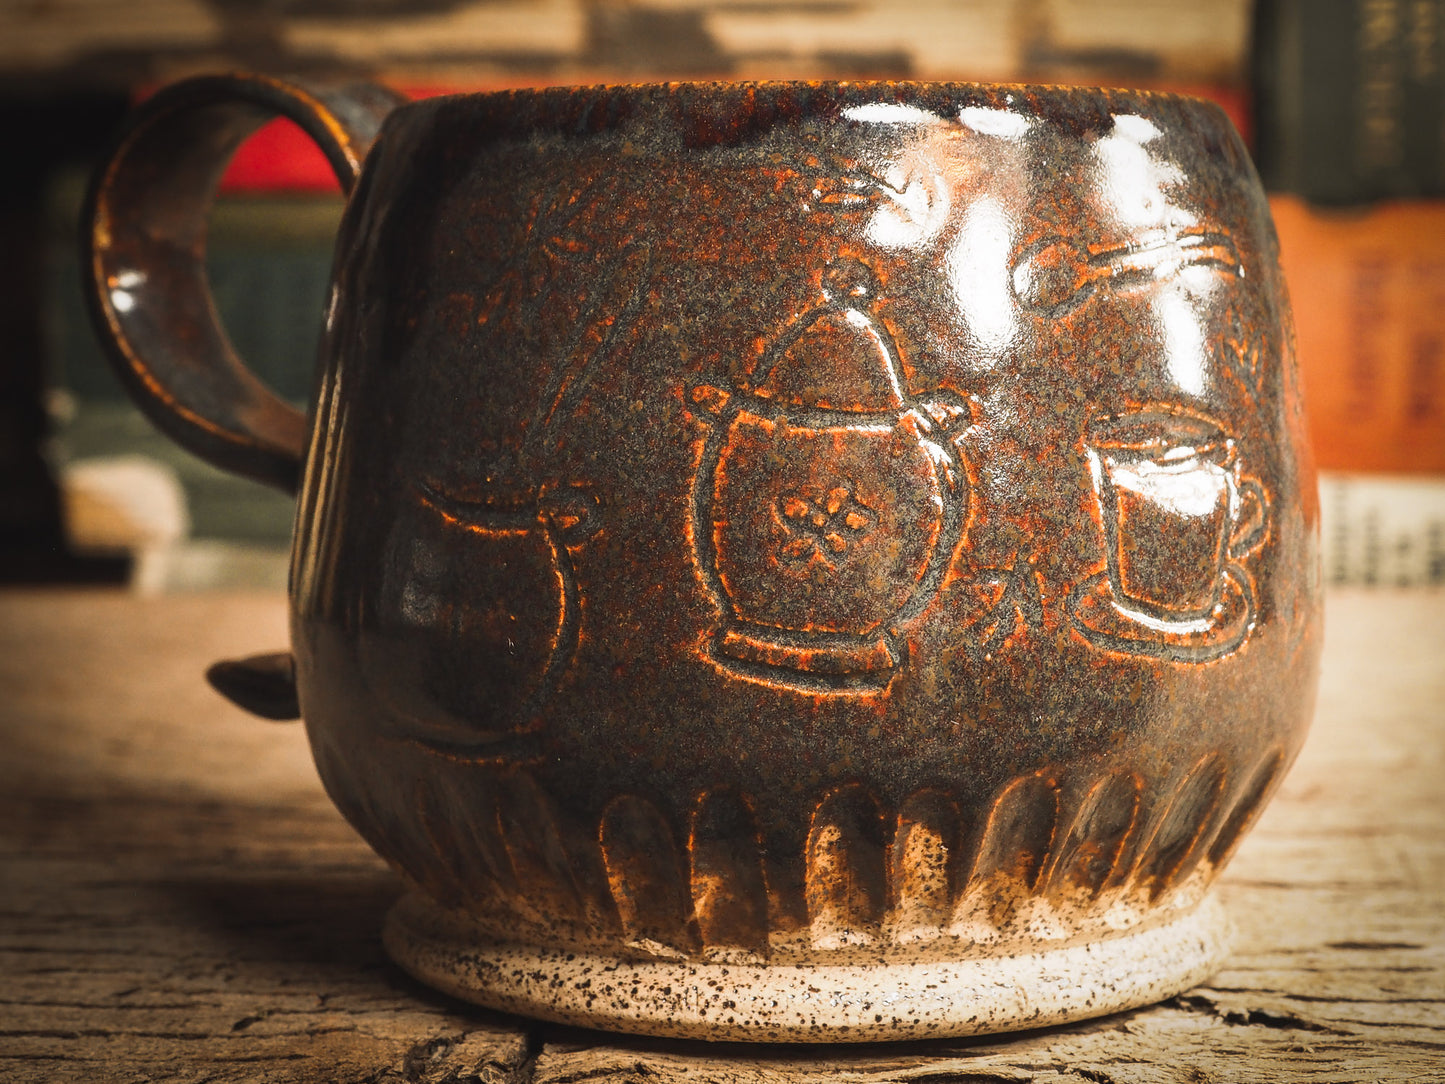 This super cute coffee mug has a little cat preparing his morning coffee carved on the sides of the mug and then glazed with beautiful earth tone glazes. An original ceramic coffee and tea mug by Idania Salcido, the artist behind Danita Art. It measures 3 x 3 x3 Inches, totally handmade in my studio. Food and drink safe, hand wash only.